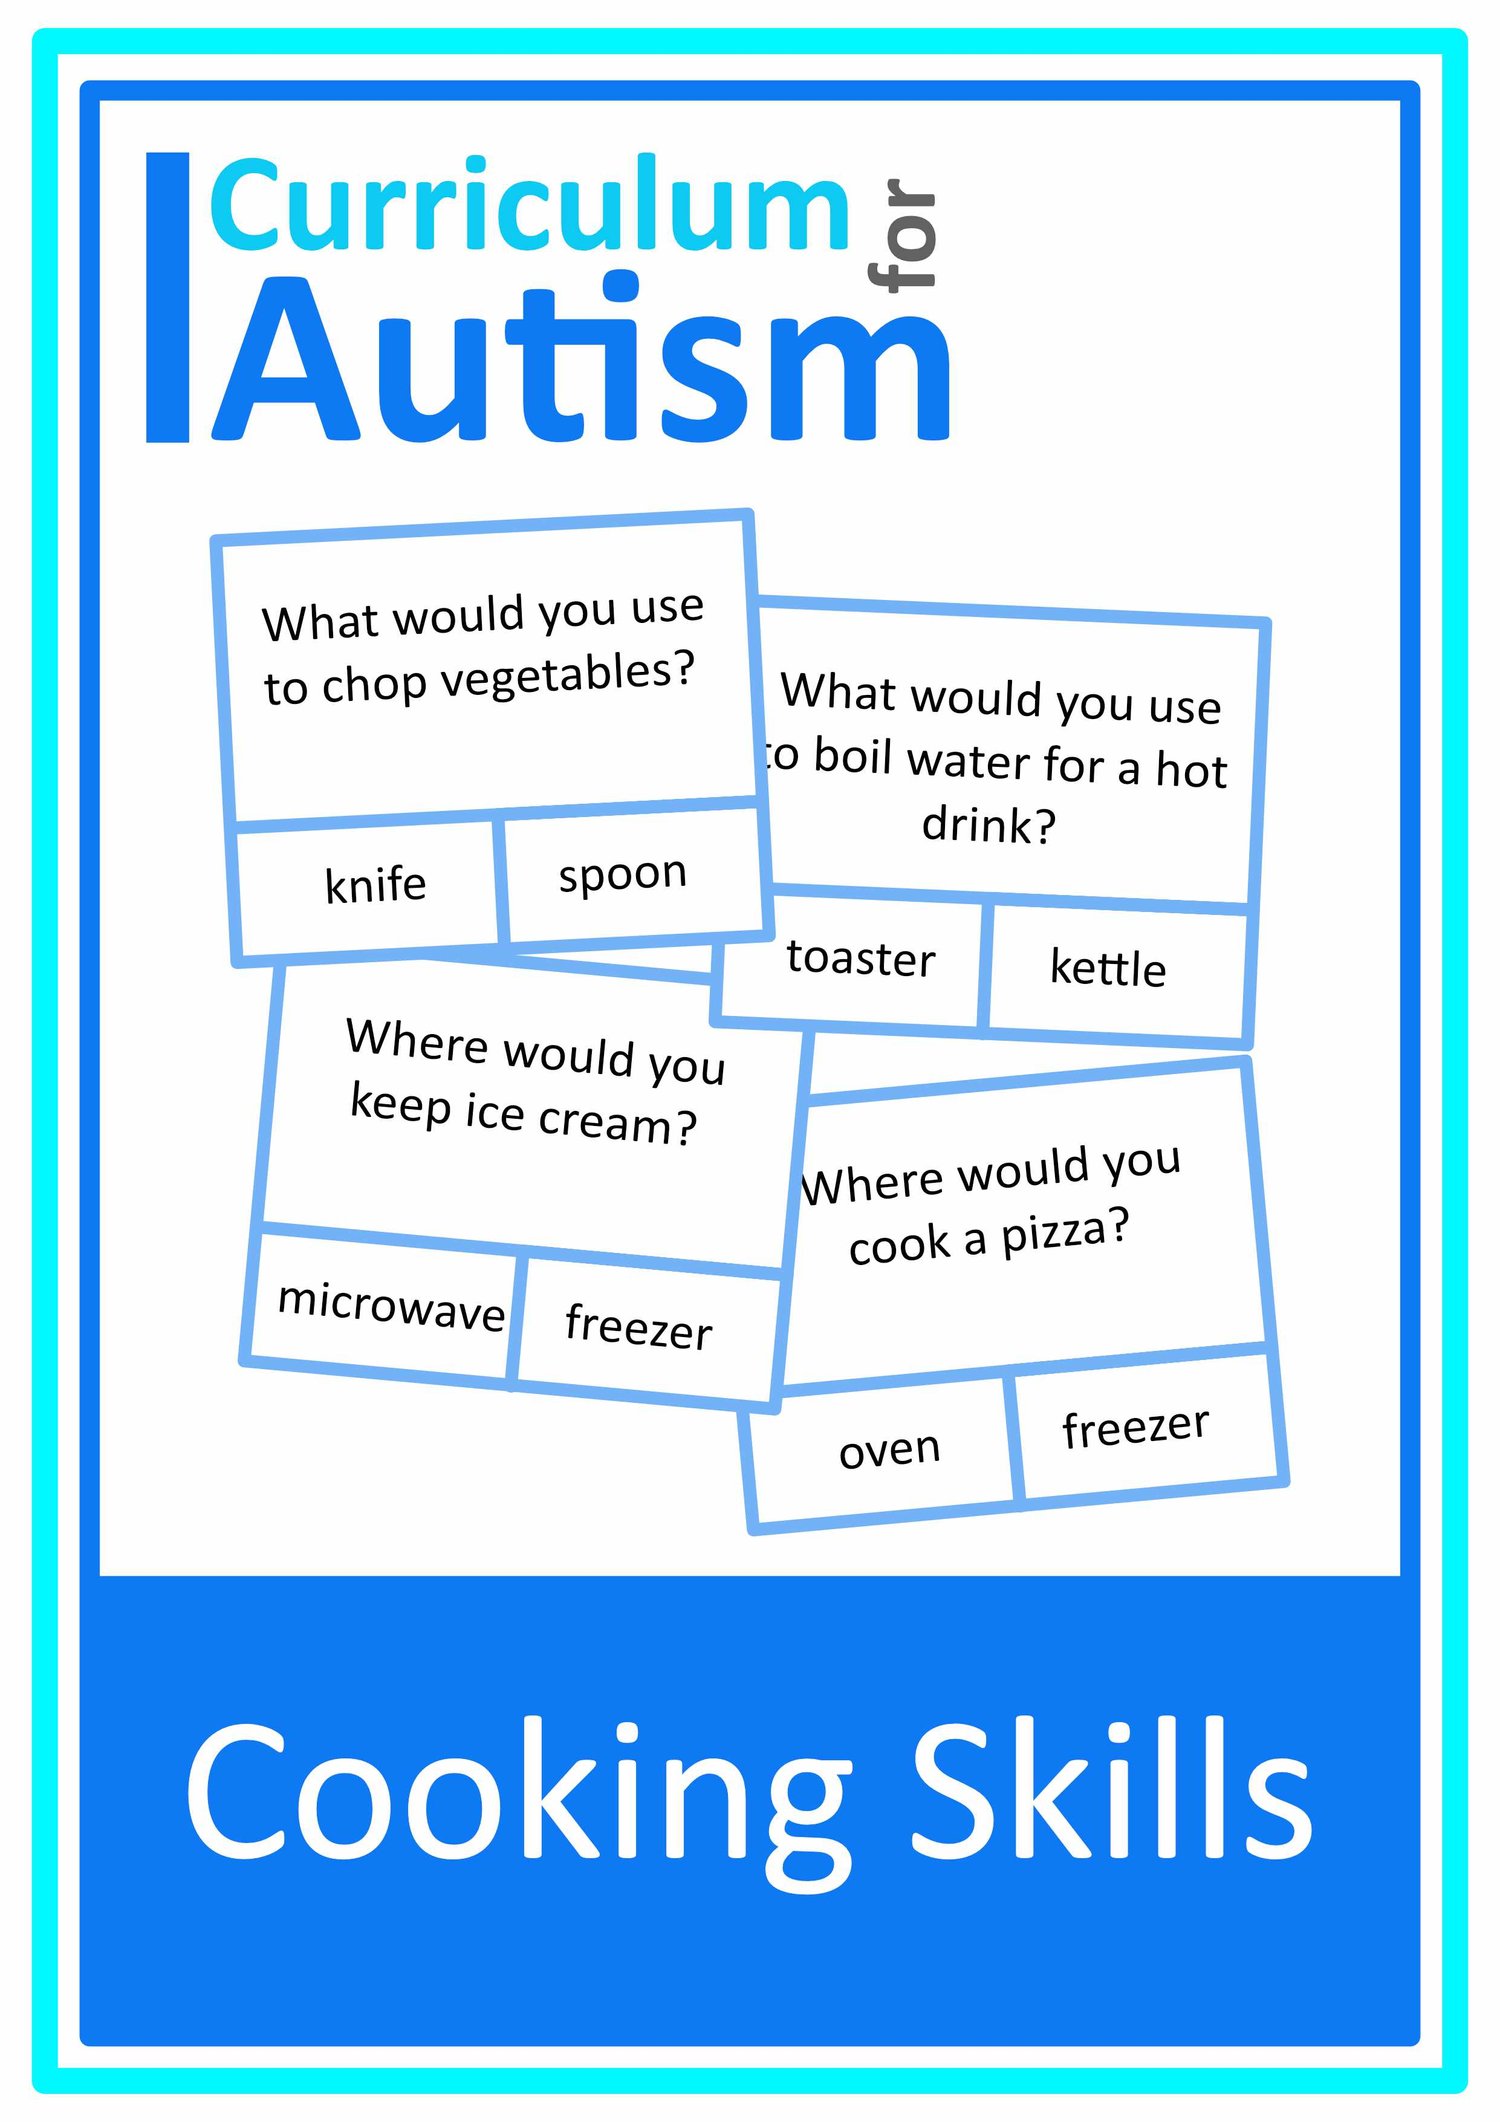 Kitchen Utensil (Matching) - Life Skills/Autism by Coffee House